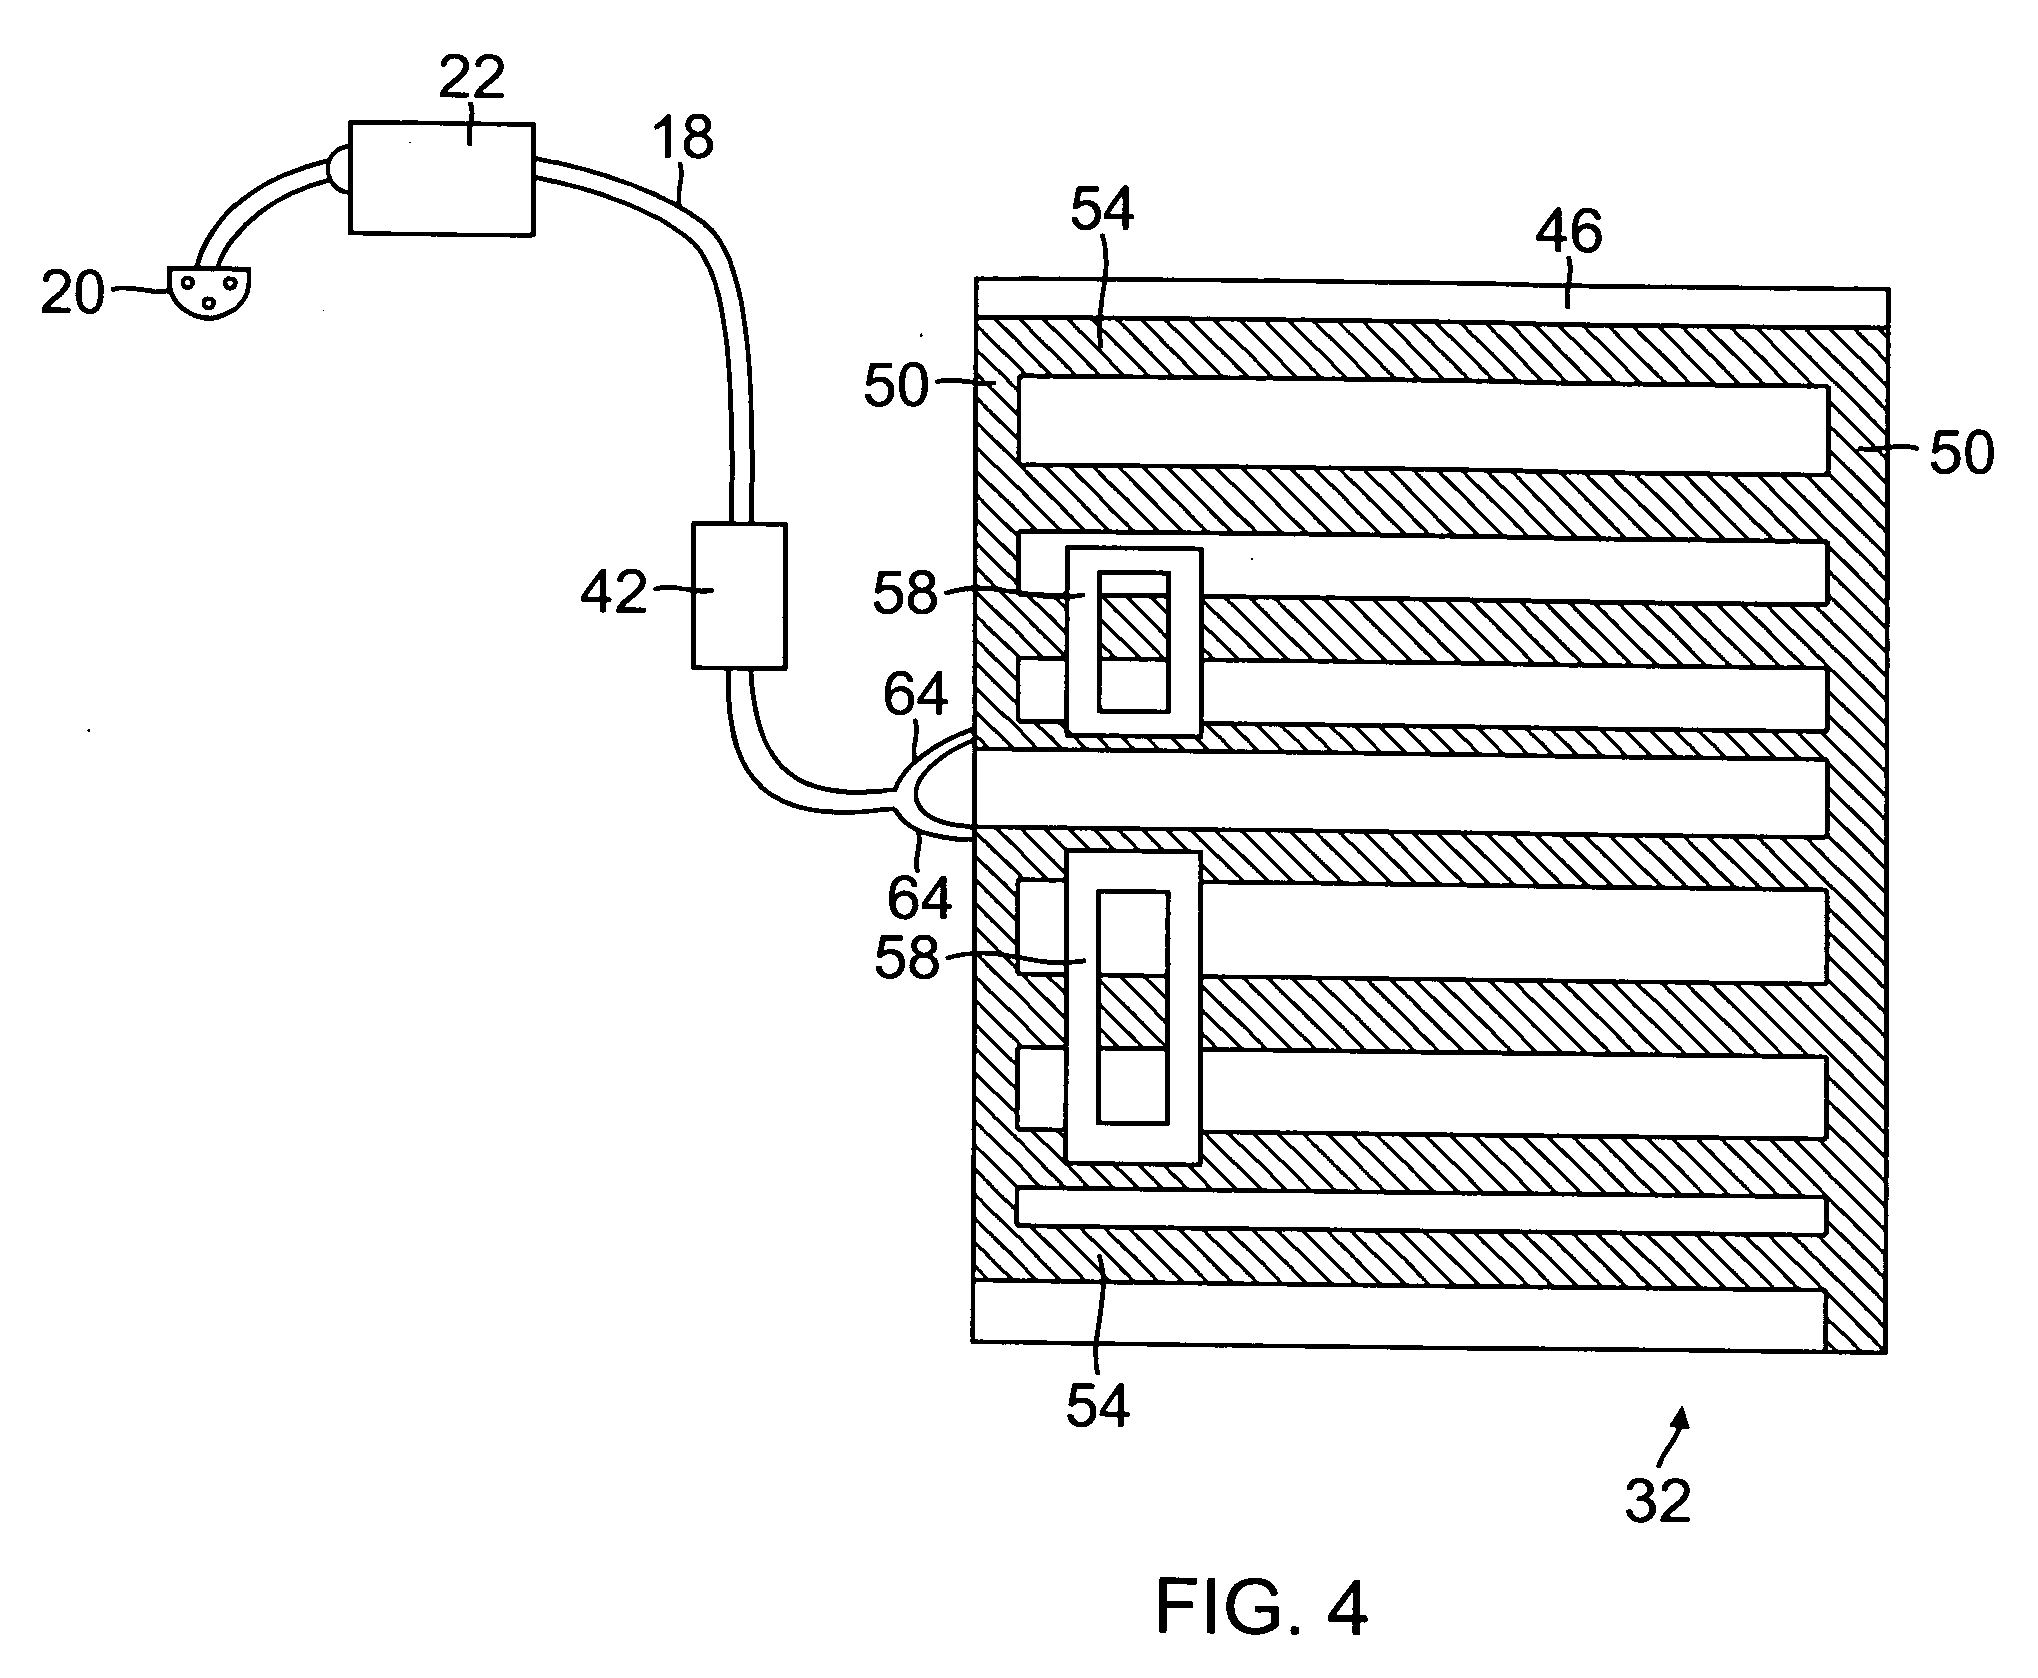 Radiant heating apparatus and method for therapeutic heating